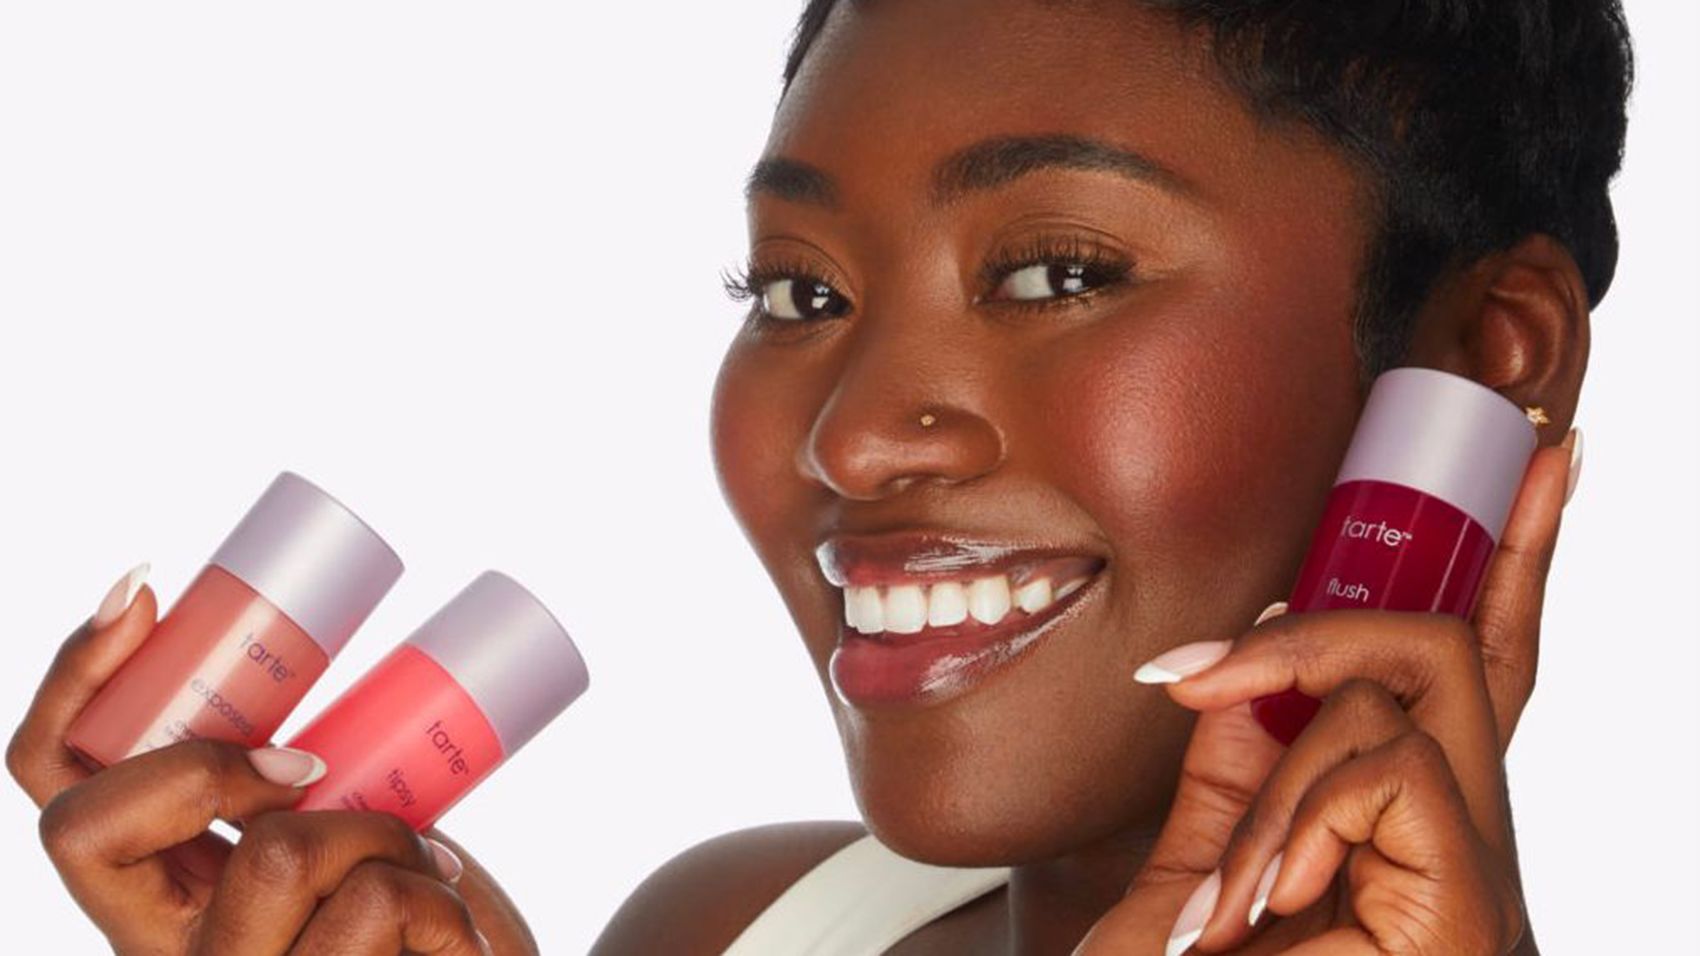 Three Beauty Brands Leading the “Clean Girl Aesthetic” Trend